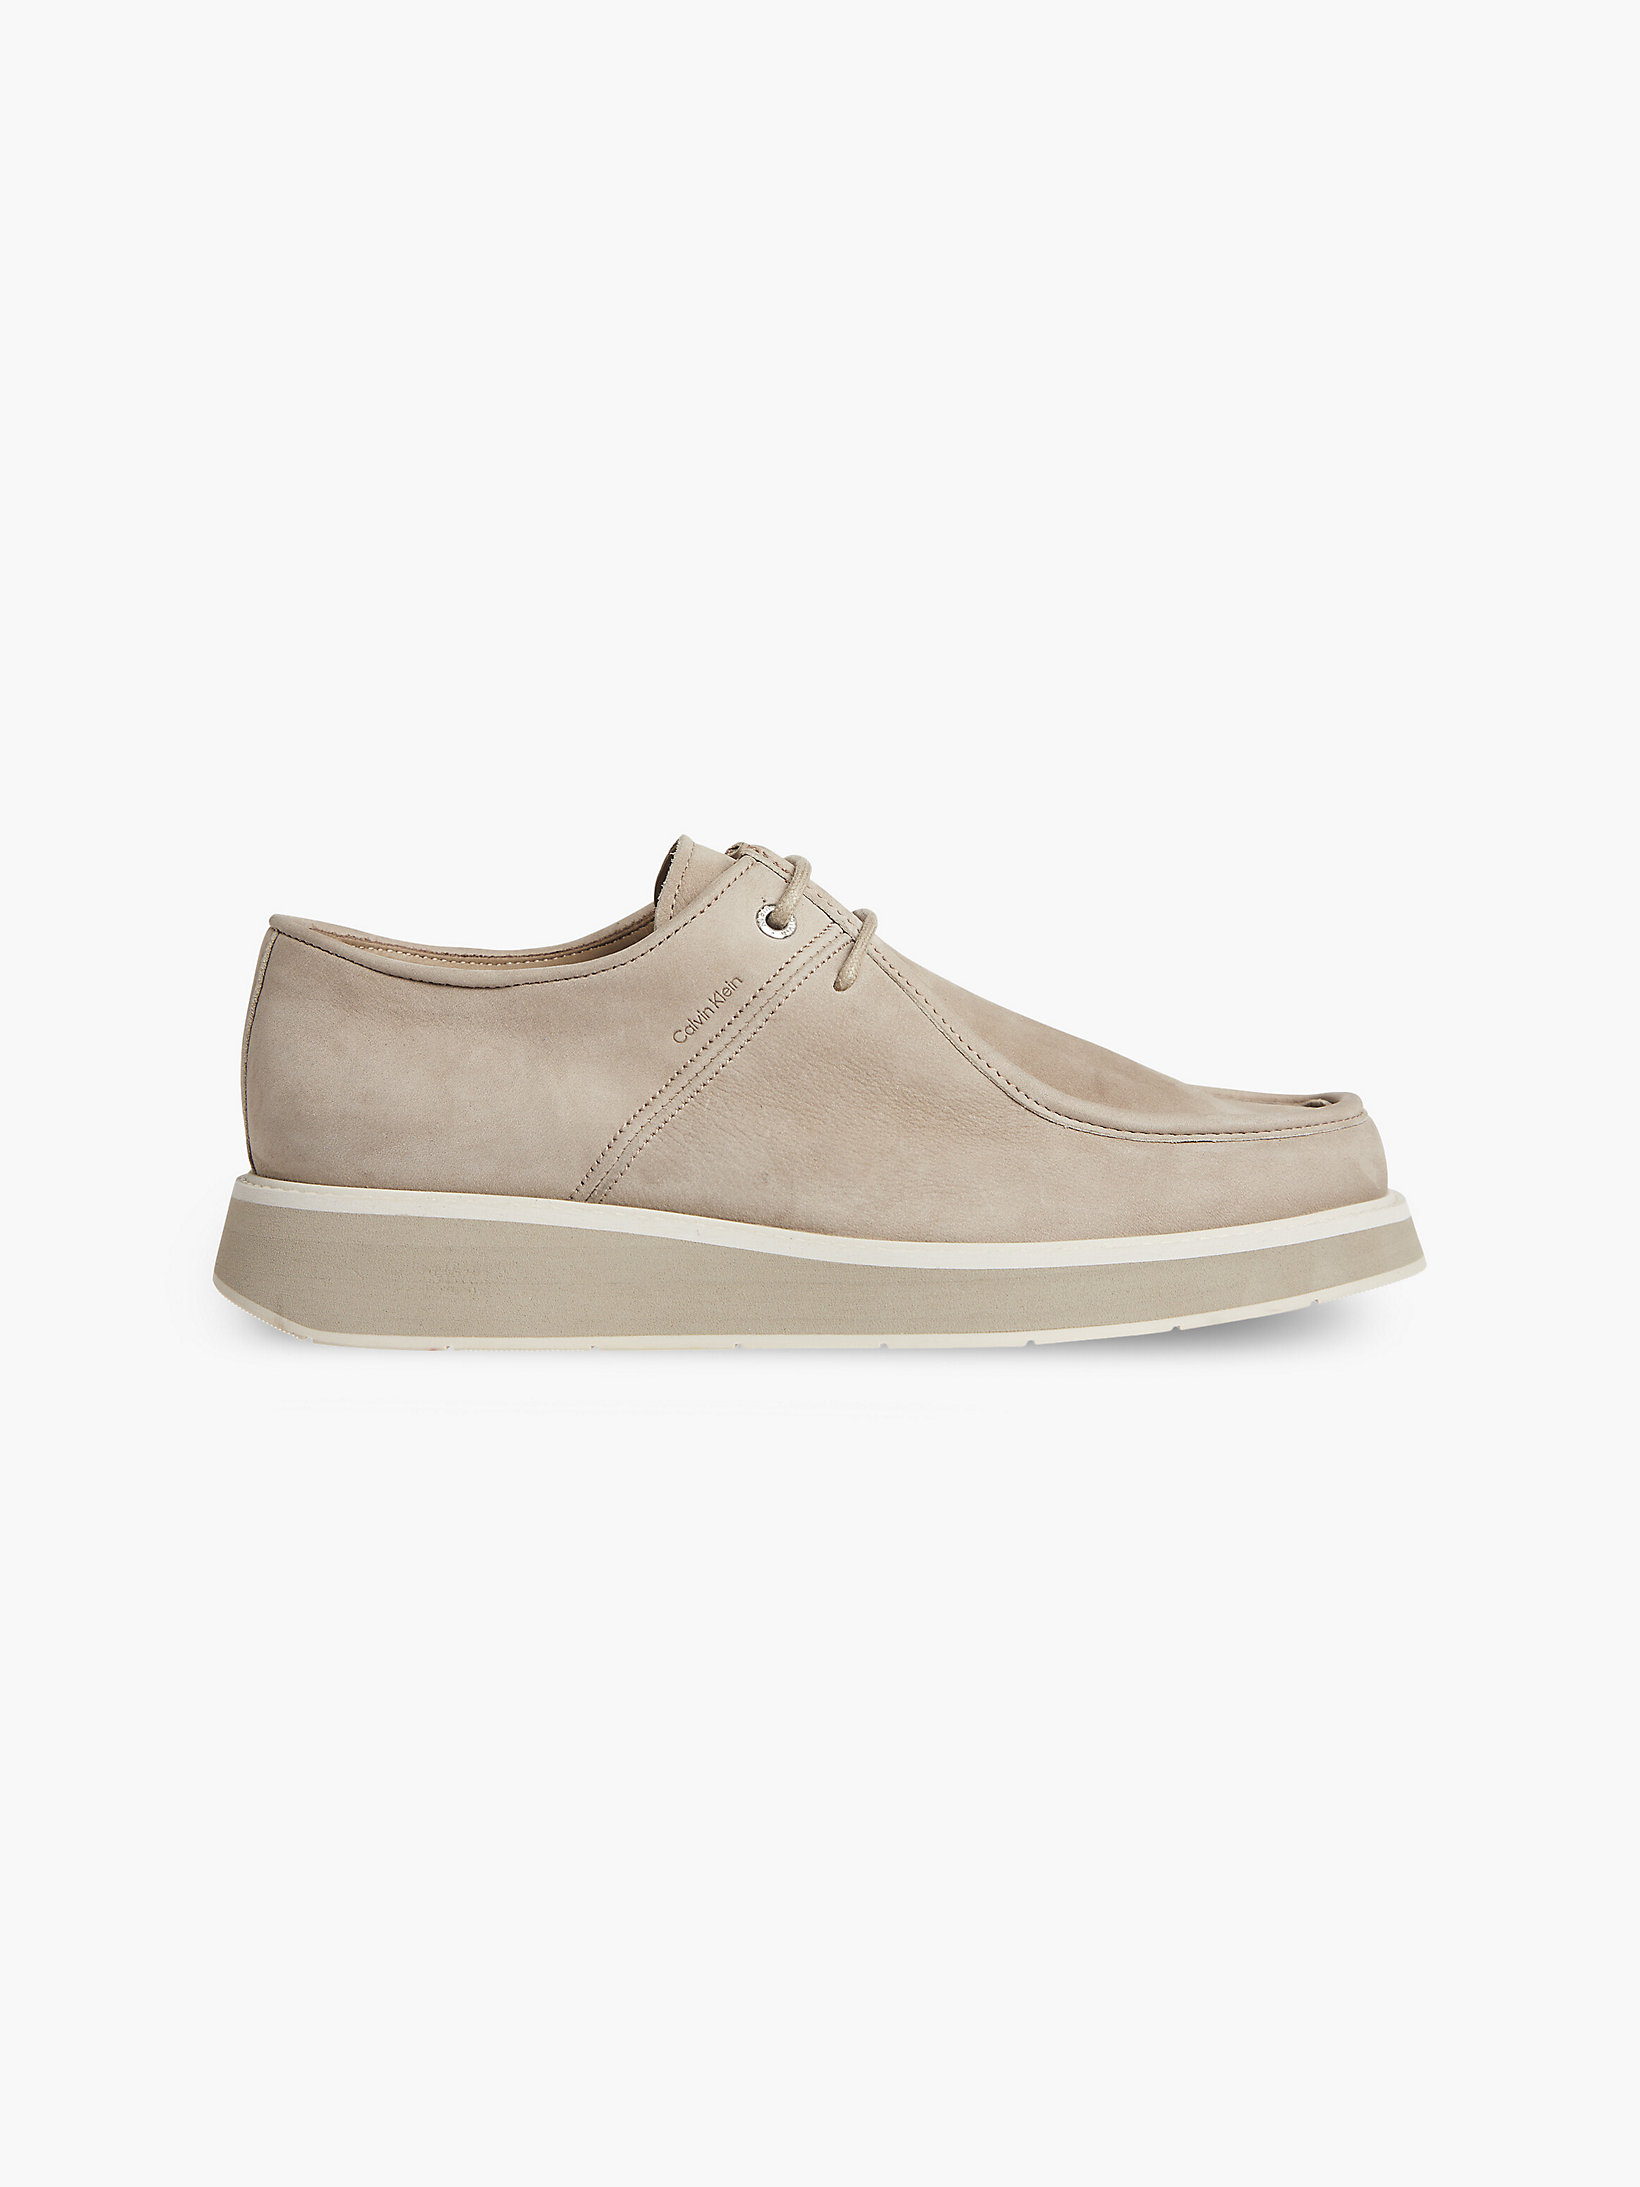 Shadow Beige Leather Lace-Up Shoes undefined men Calvin Klein